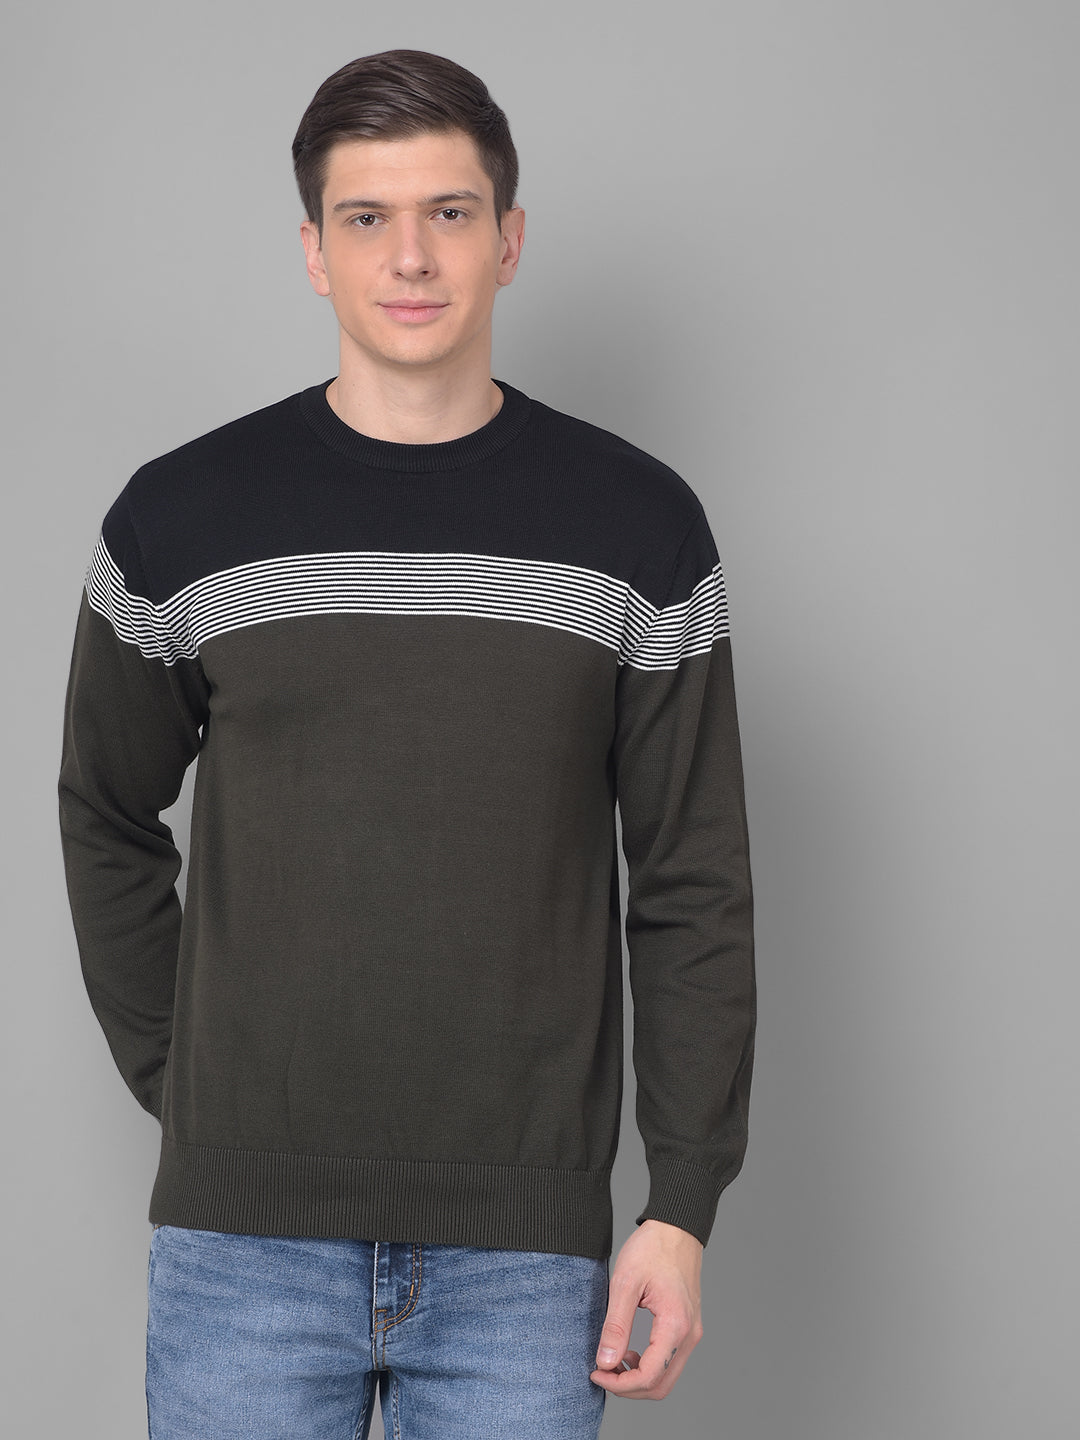 COBB OLIVE STRIPED ROUND NECK SWEATER OLIVE